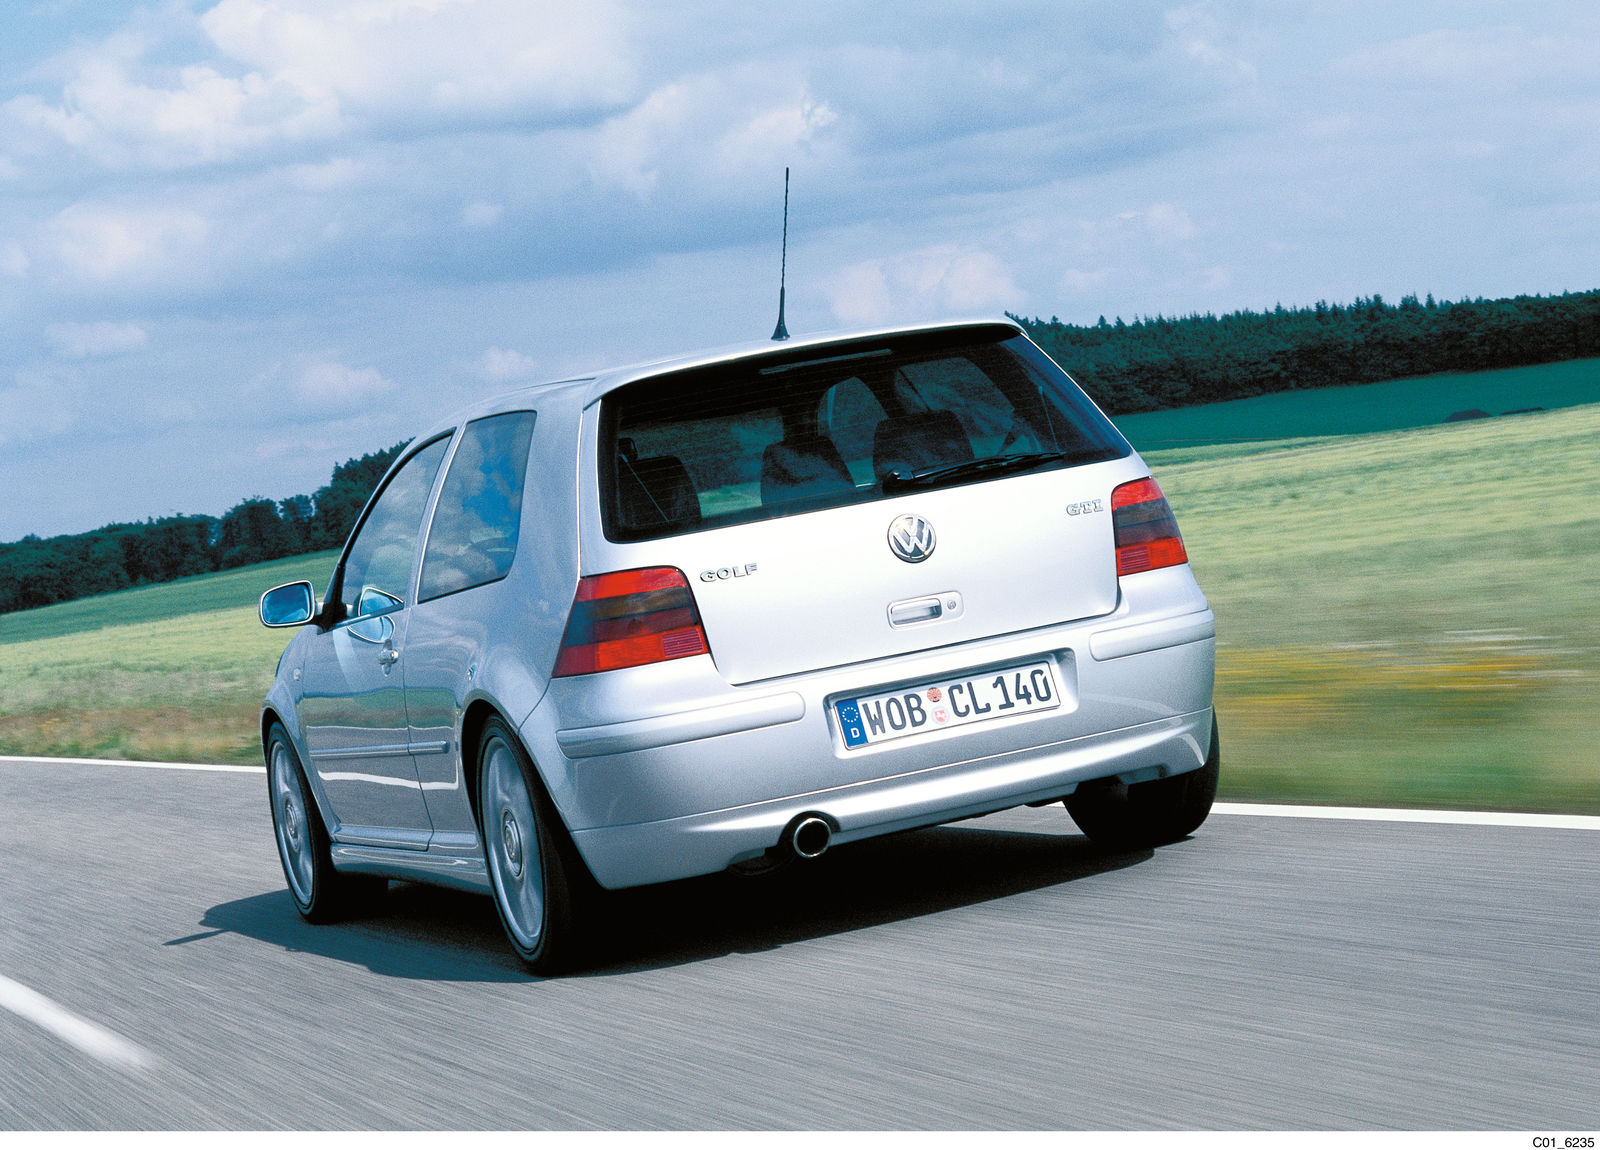 Product: Golf GTI 132 kW (180 PS)